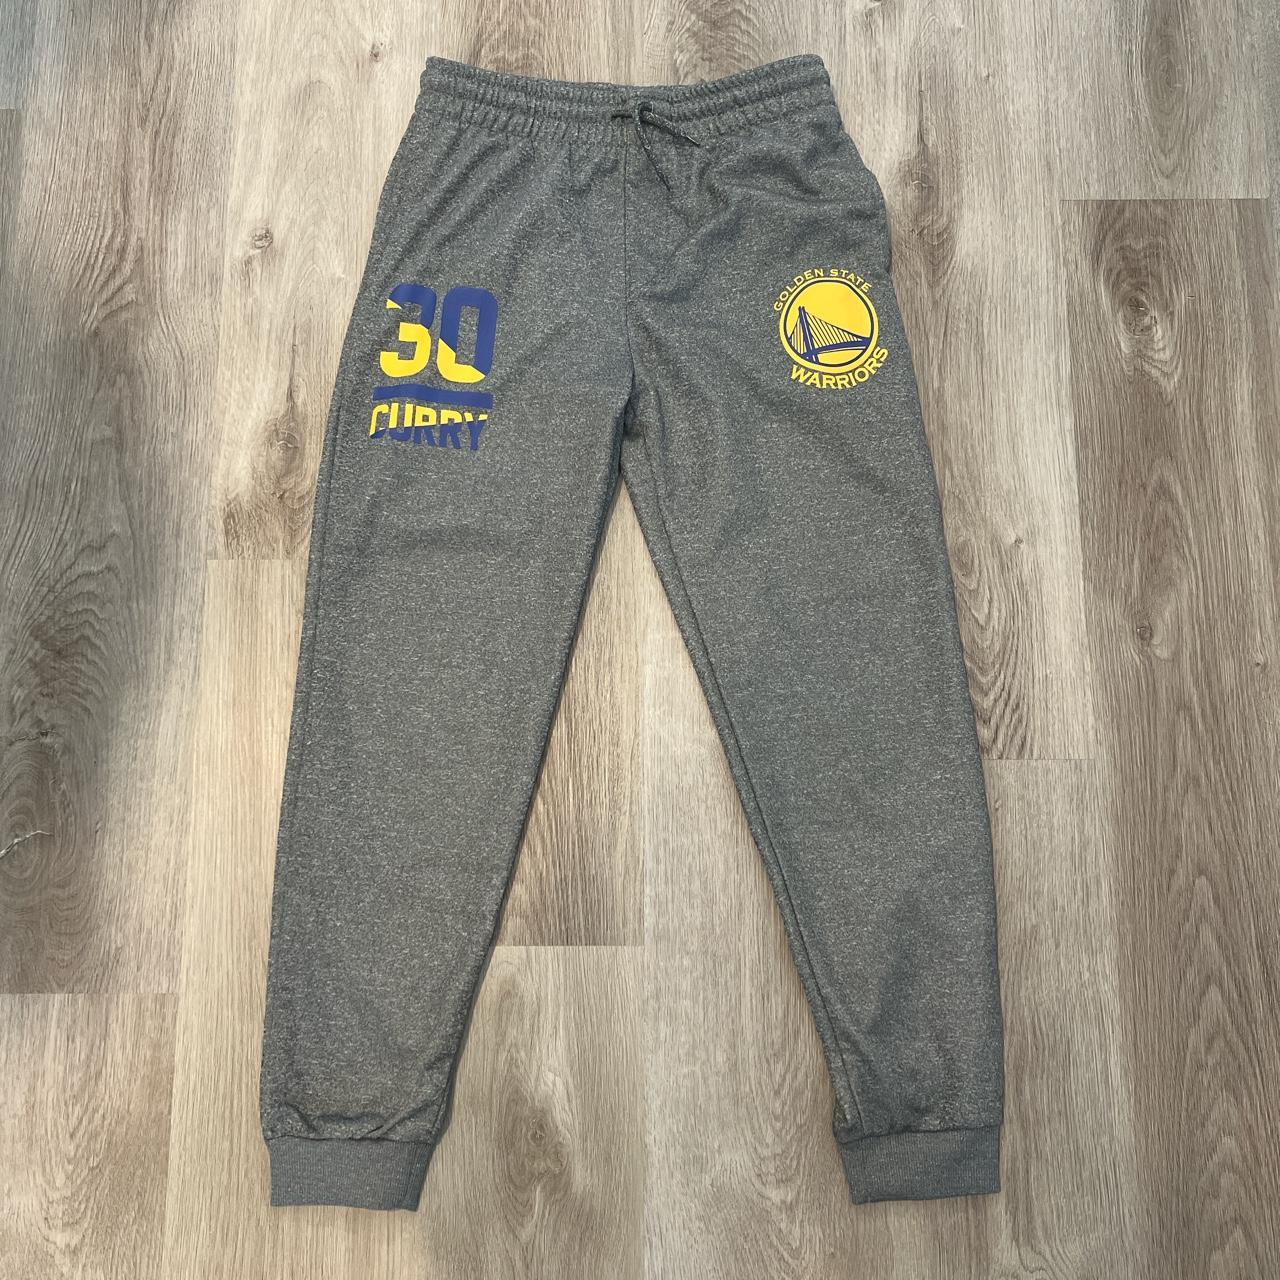 golden state warriors youth sweatpants